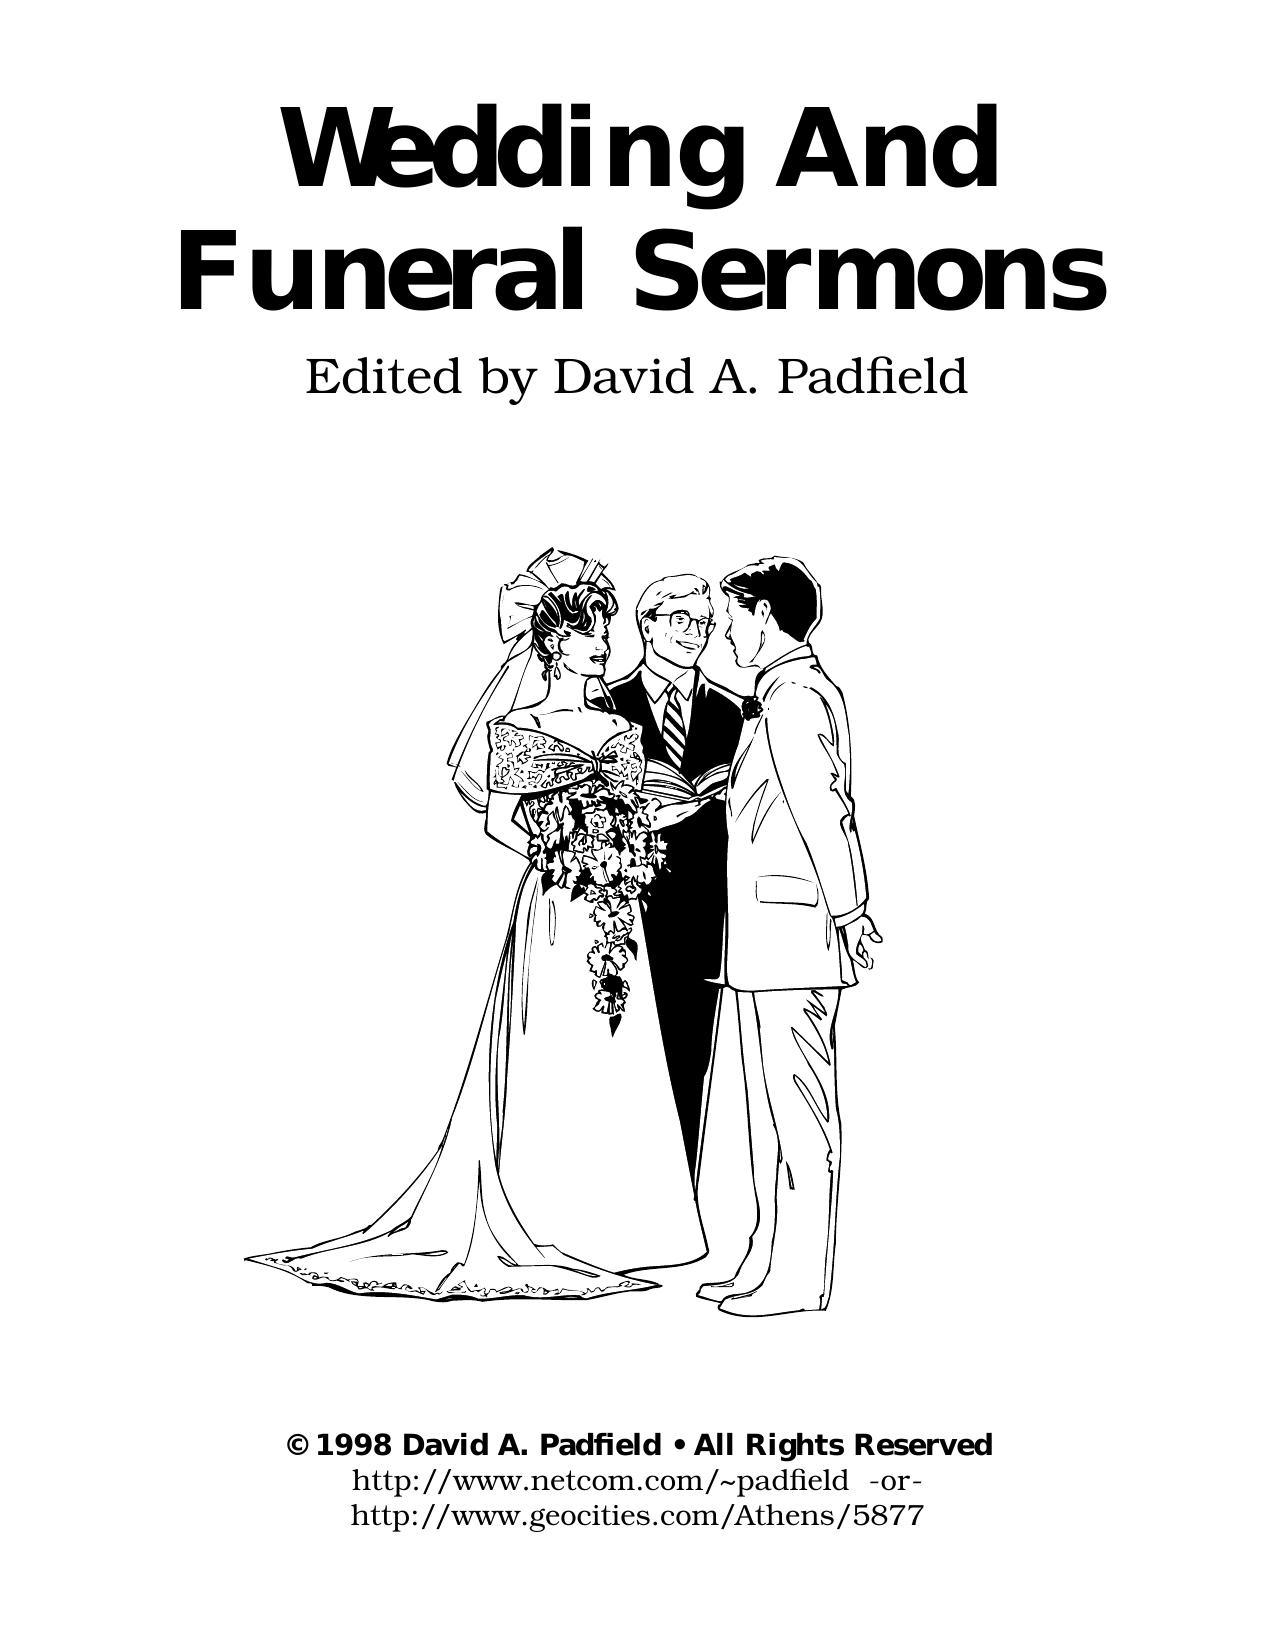 Wedding and Funeral Sermons by David A. Padfield